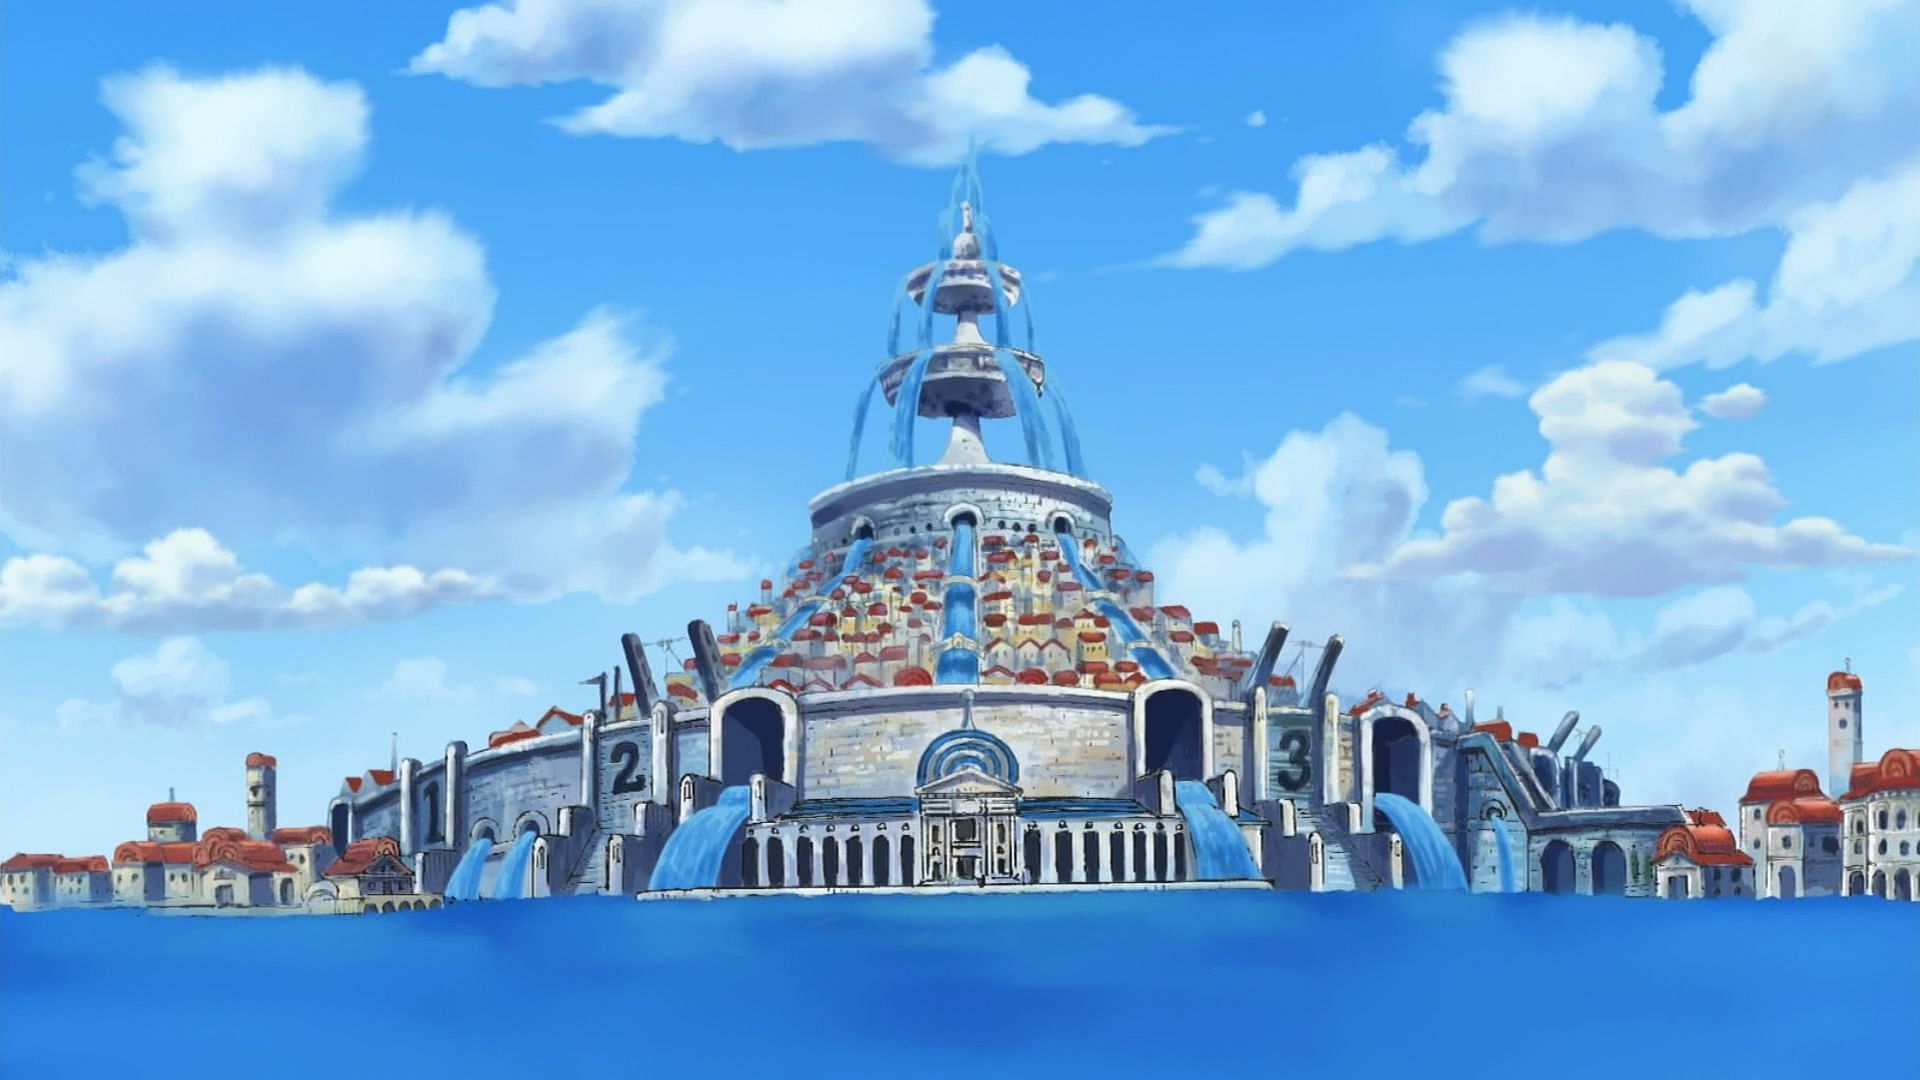 Top 5 One Piece Islands that have been mentioned but never explored